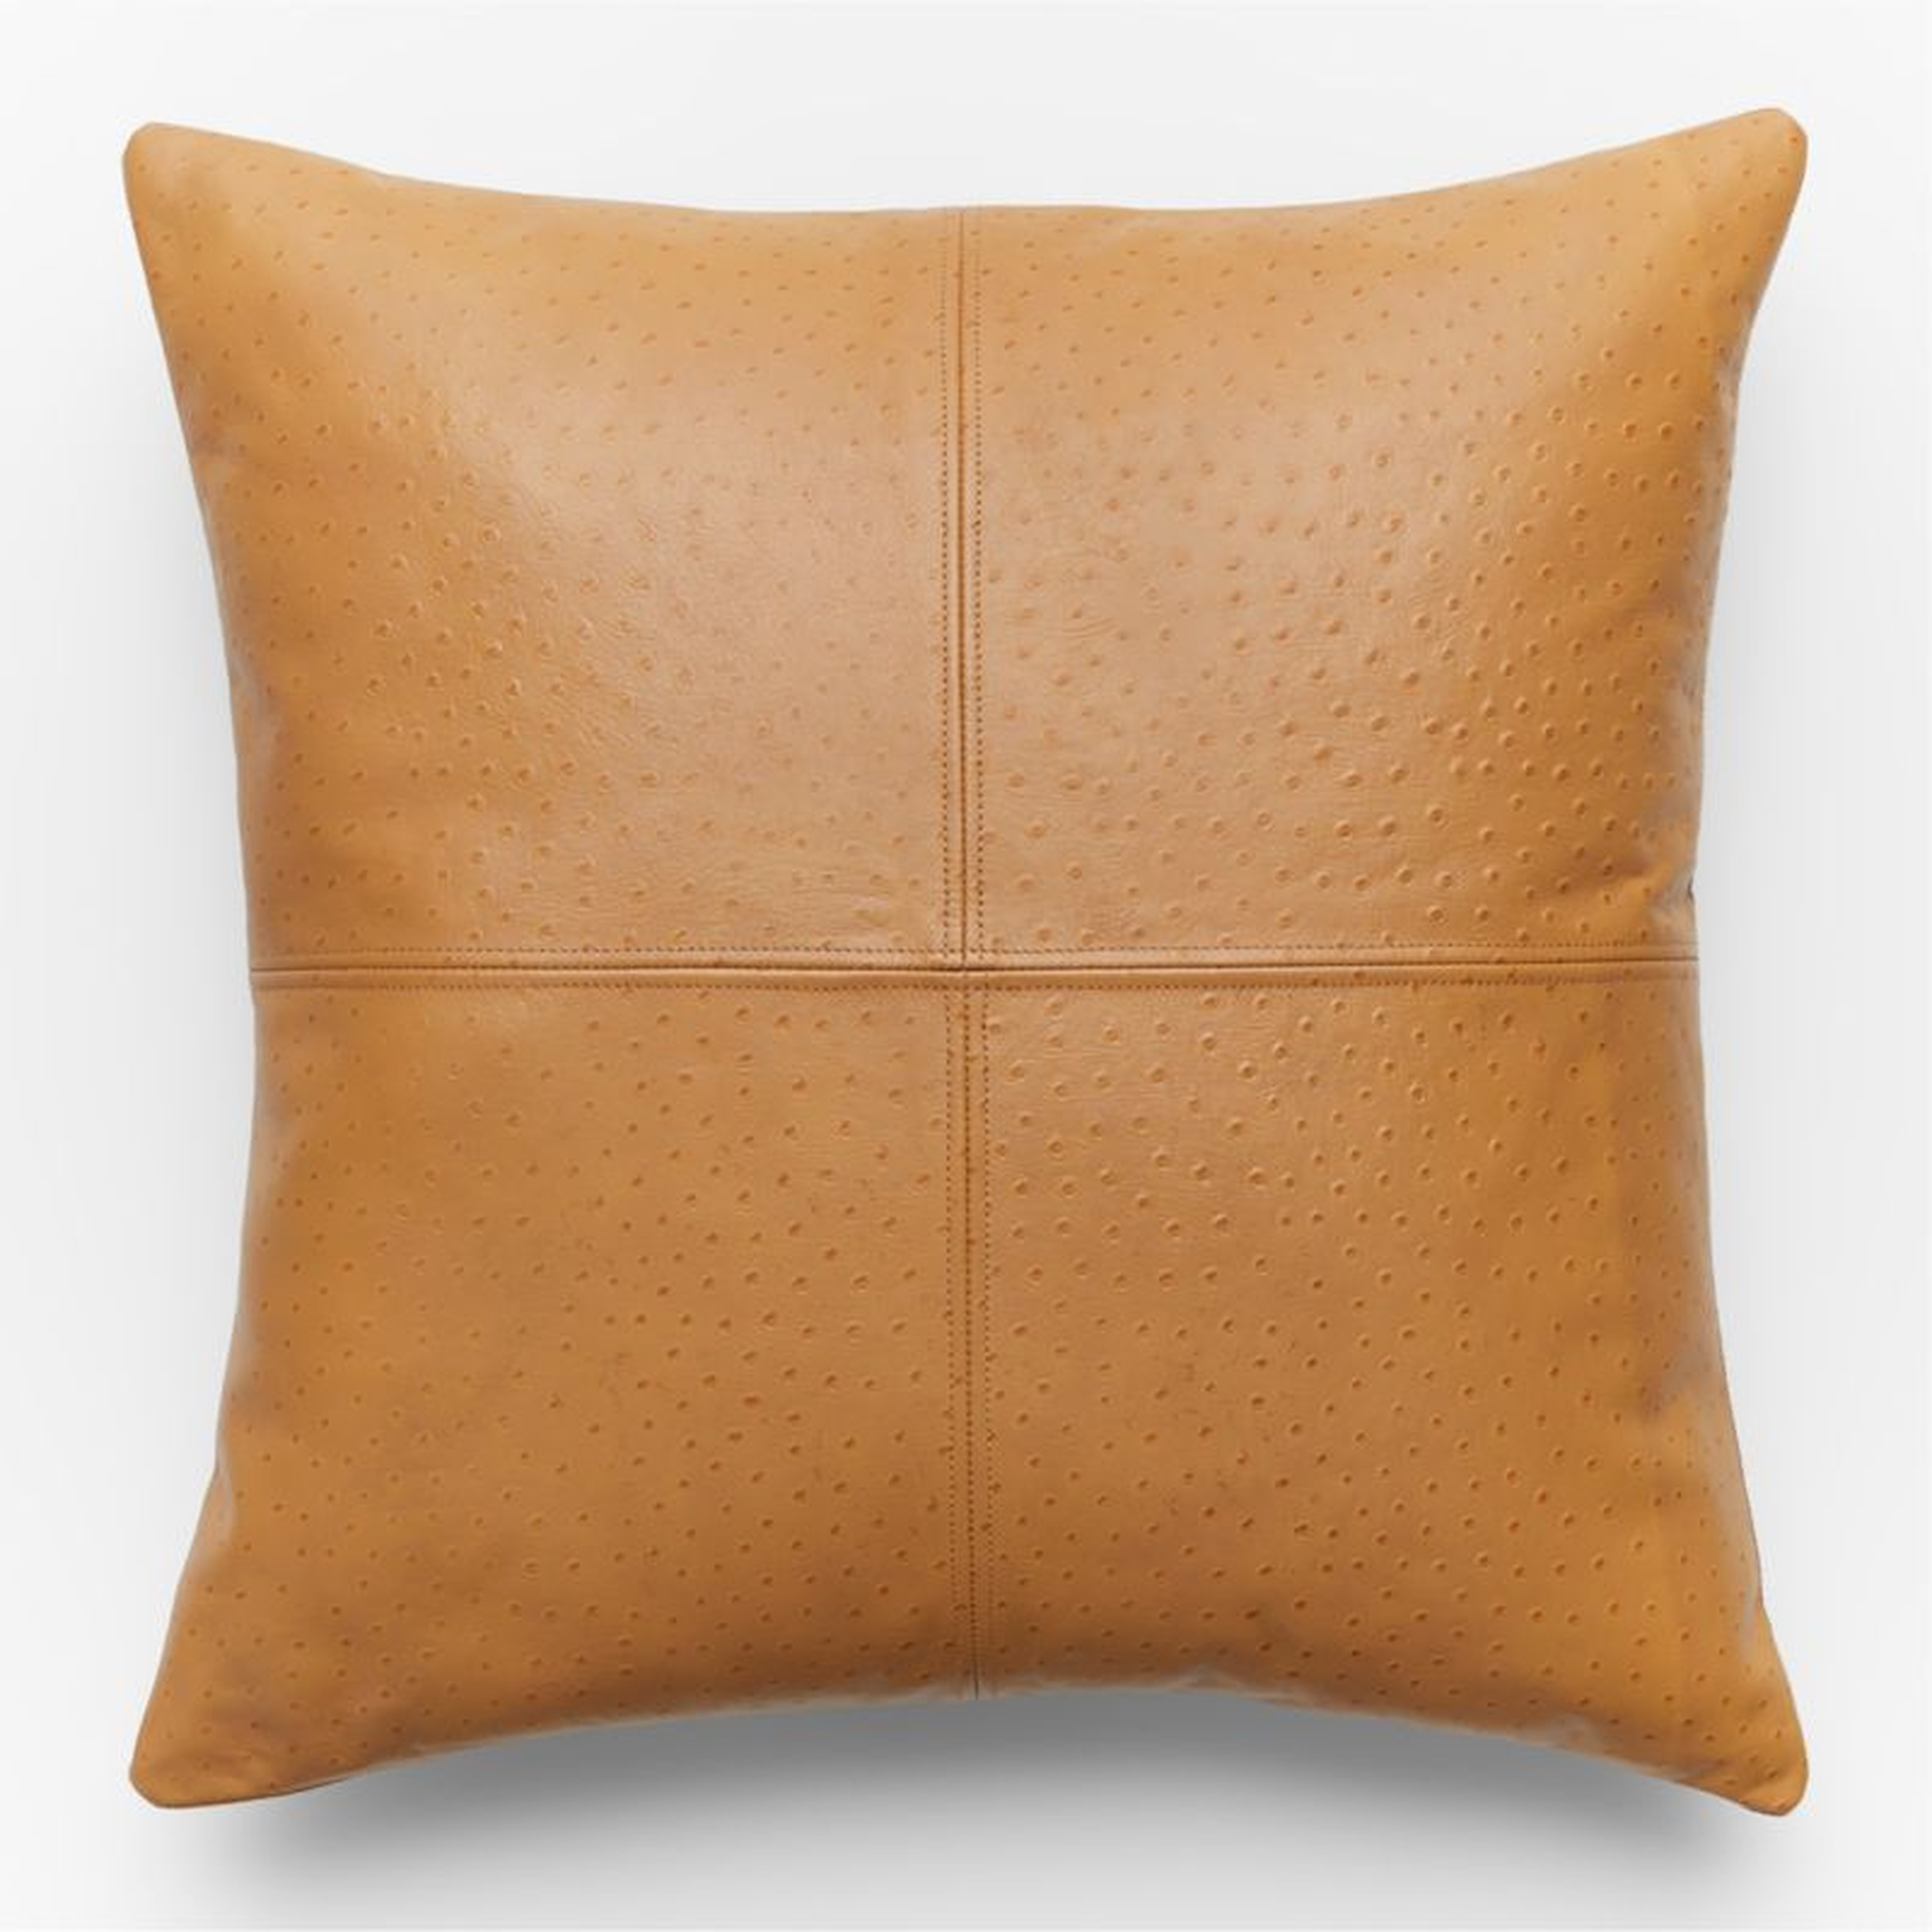 Rue Tan Leather Throw Pillow with Feather-Down Insert 23" - CB2